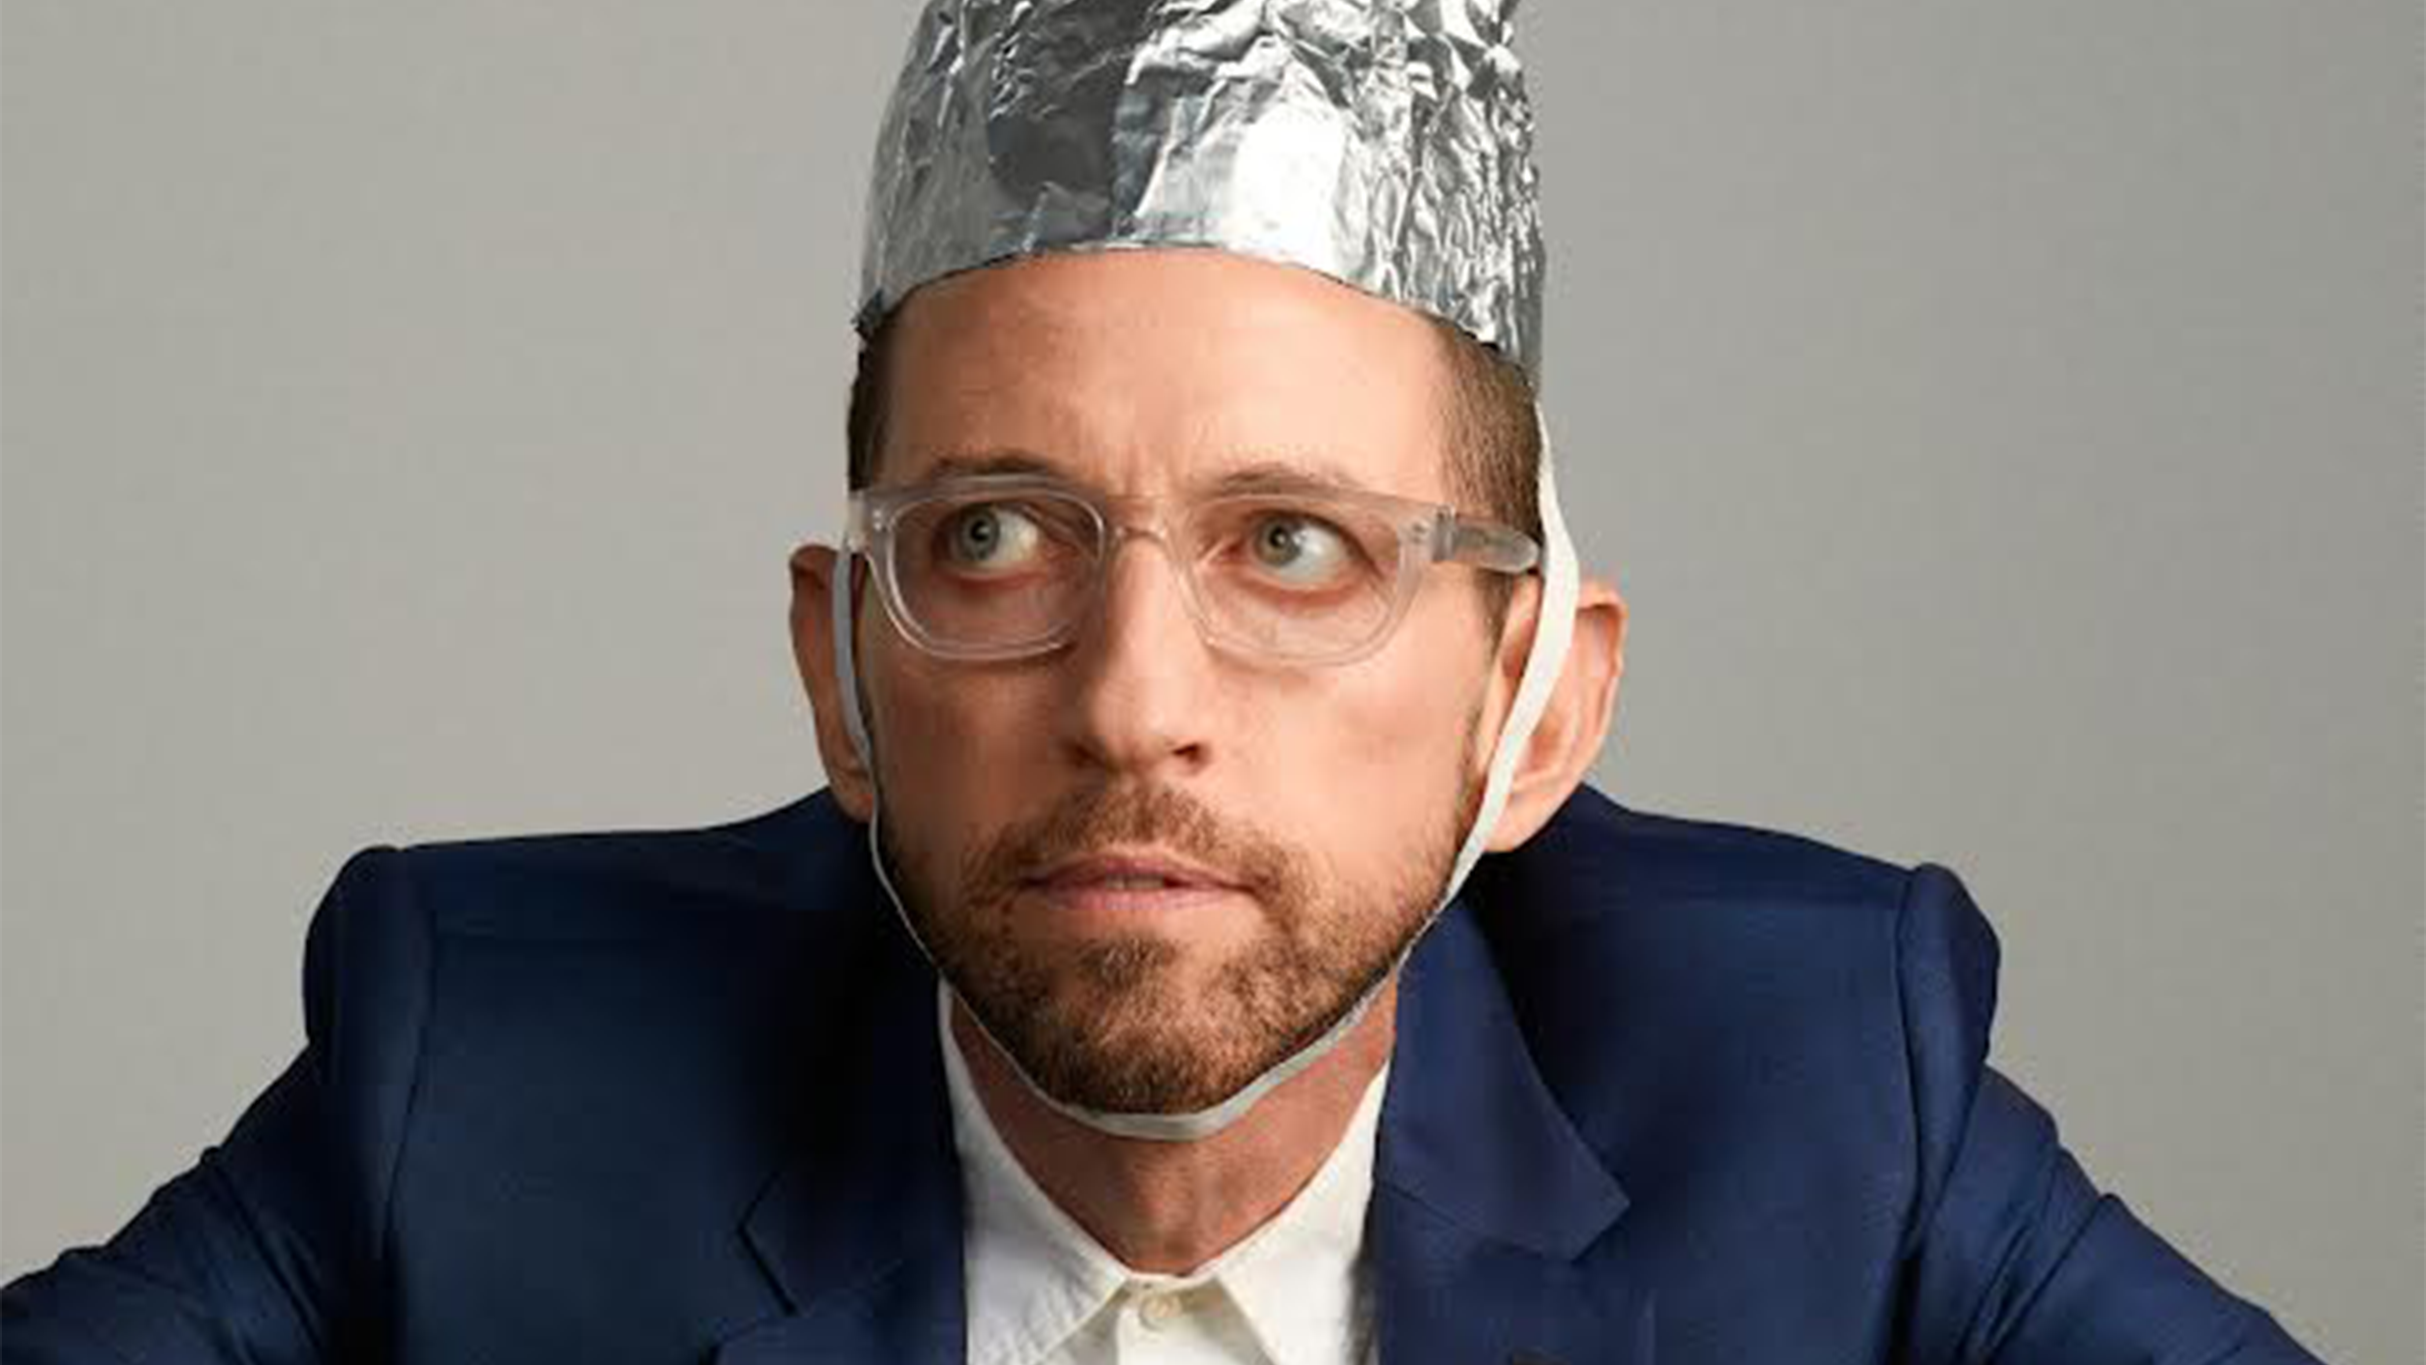 Neal Brennan: BRAND NEW NEAL in Minneapolis promo photo for Live Nation presale offer code